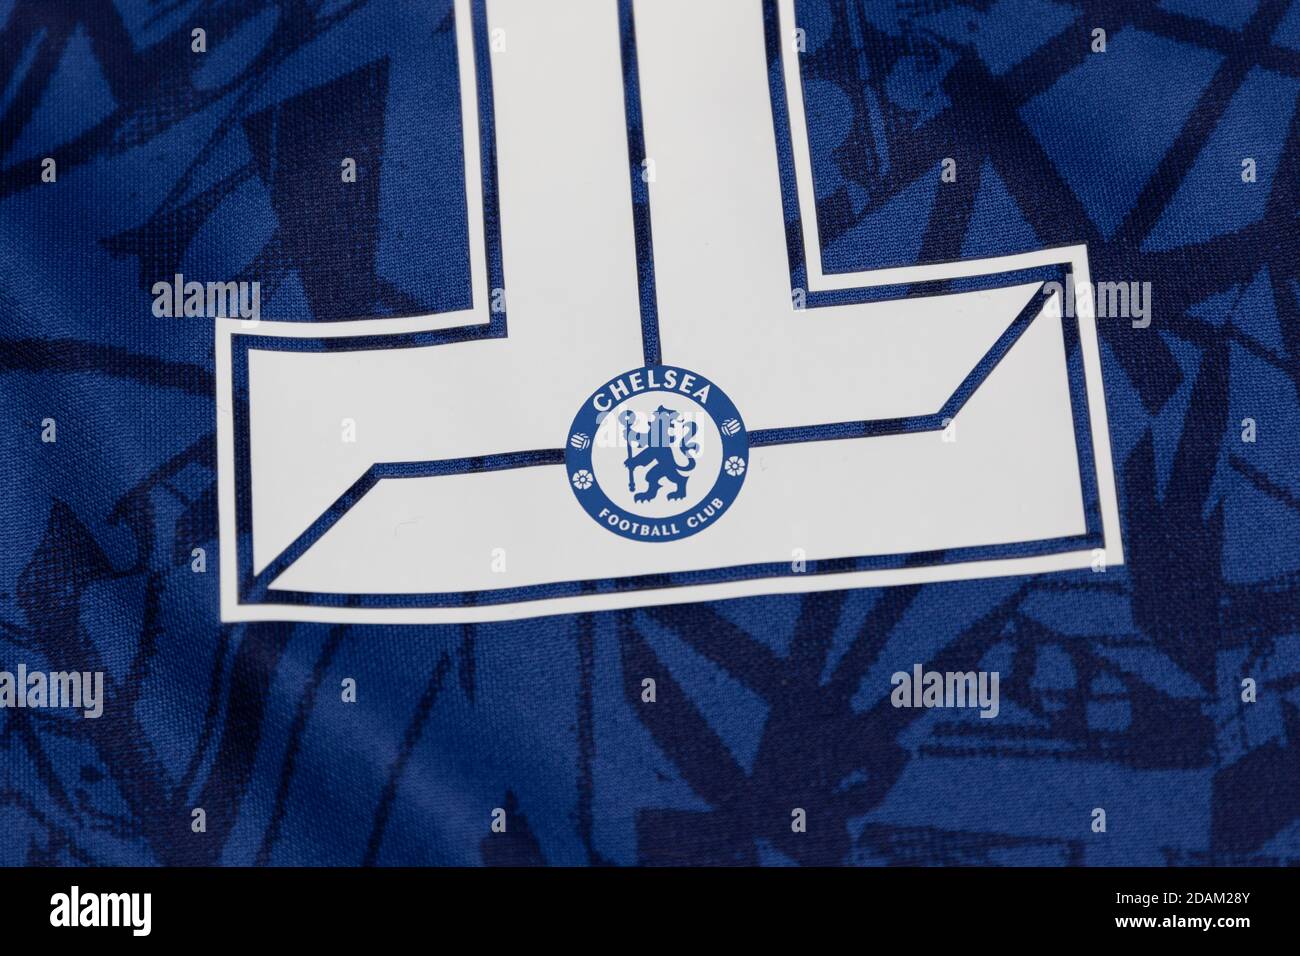 Chelsea Football Club Logo Inset Within A Number On The Back Of A 19 Chelsea Fc Women S Home Football Shirt Stock Photo Alamy